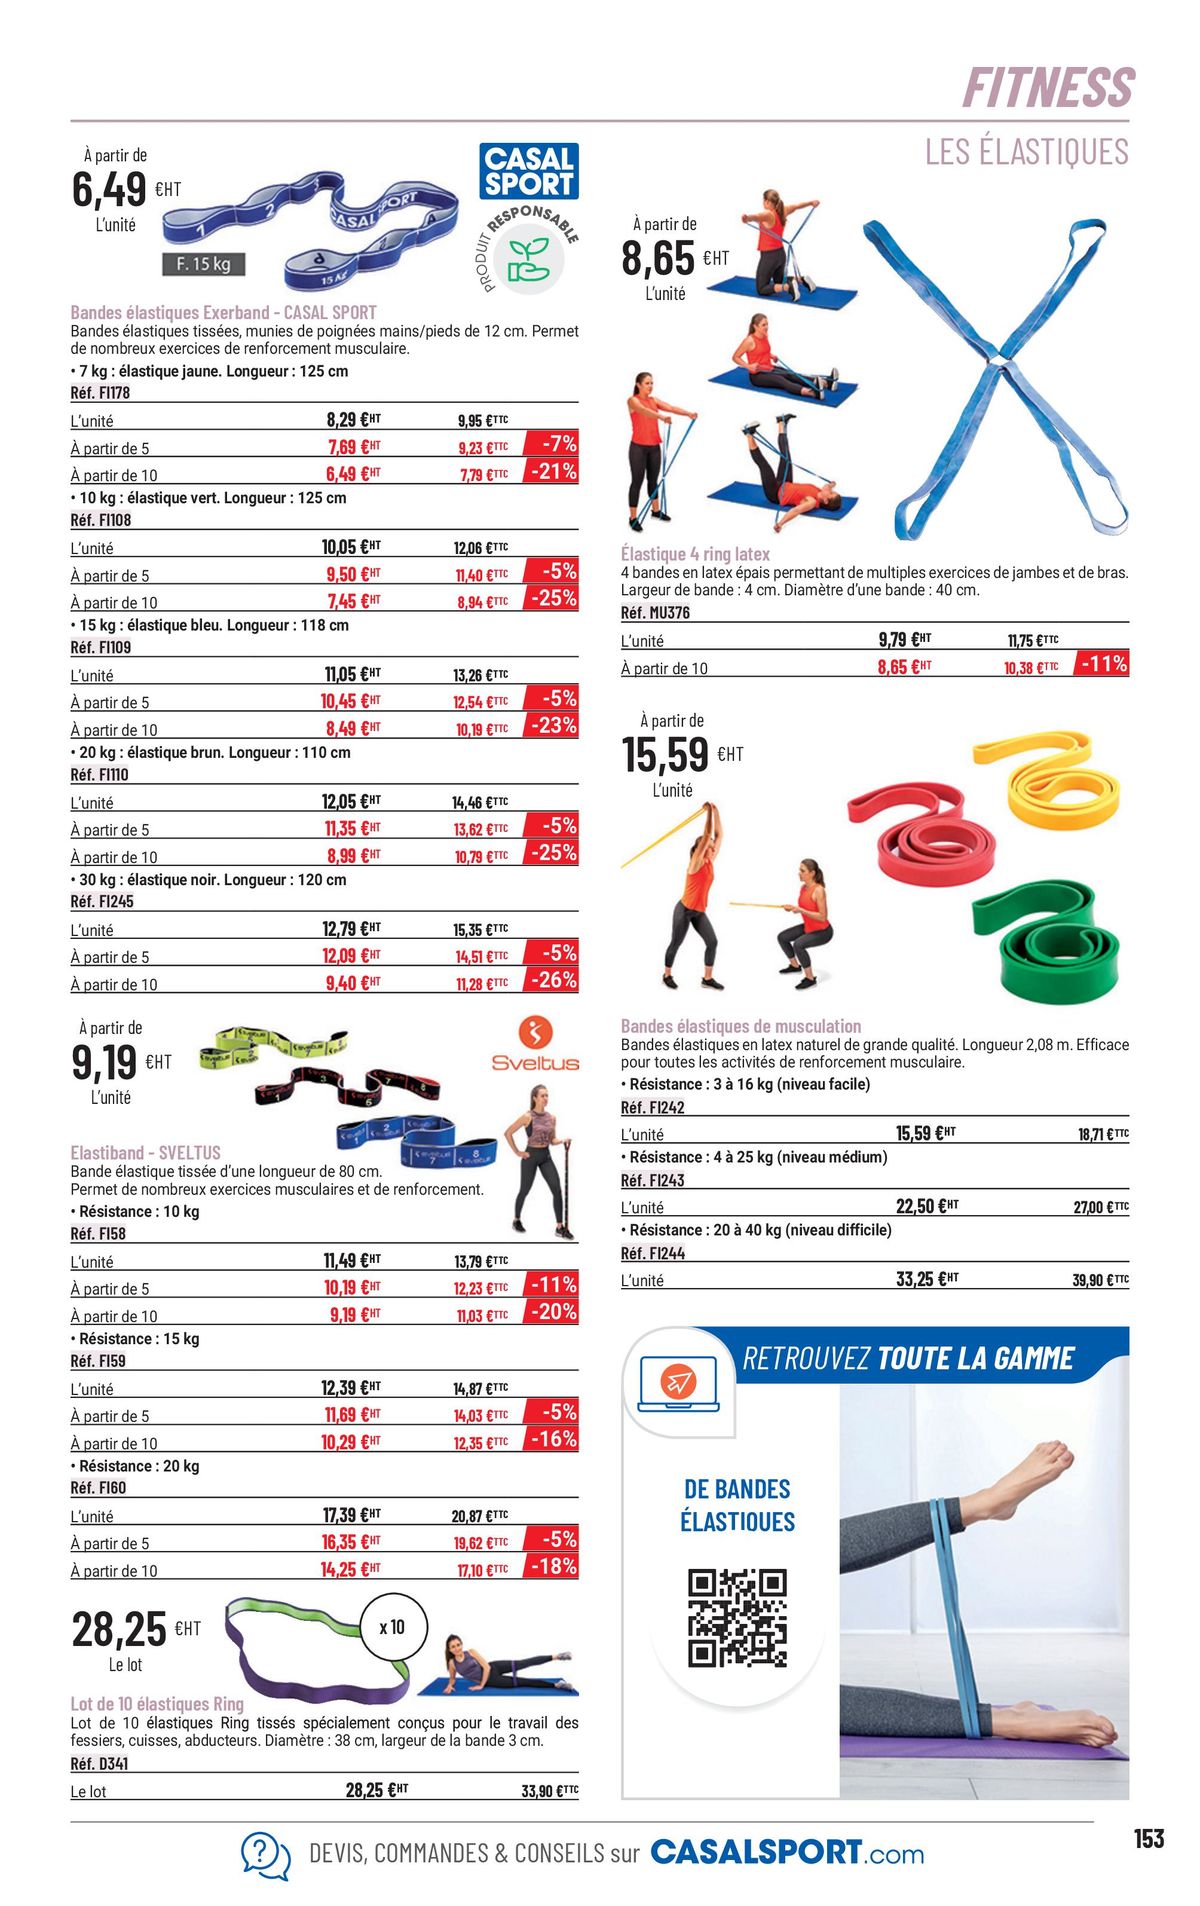 Catalogue Equipement sportif, page 00125